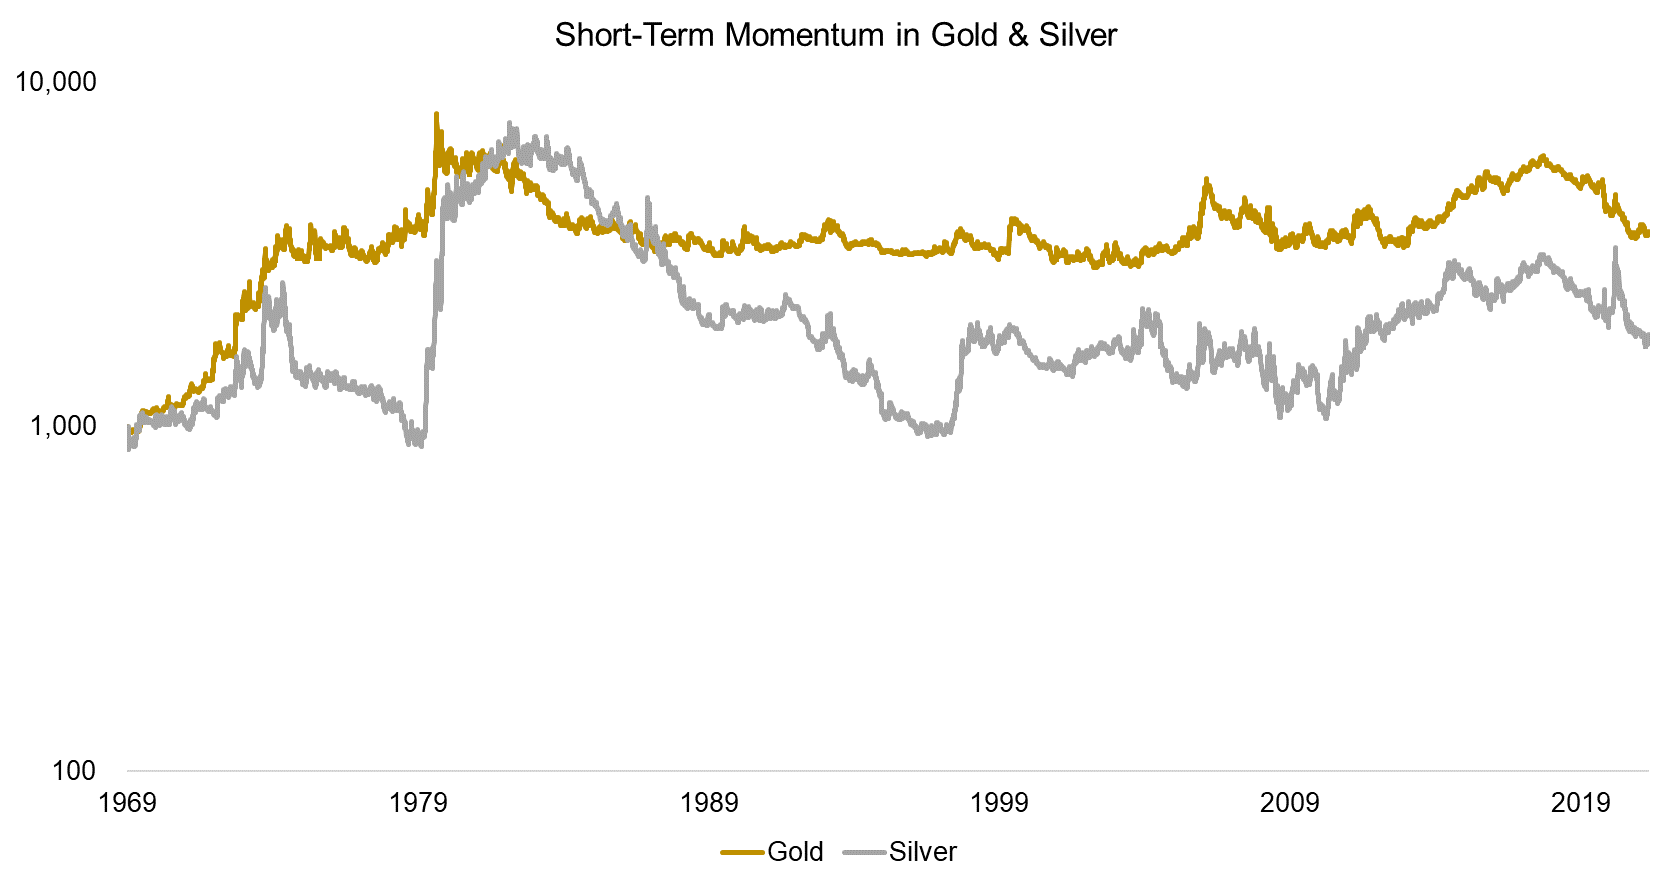 Short-Term Momentum in Gold & Silver